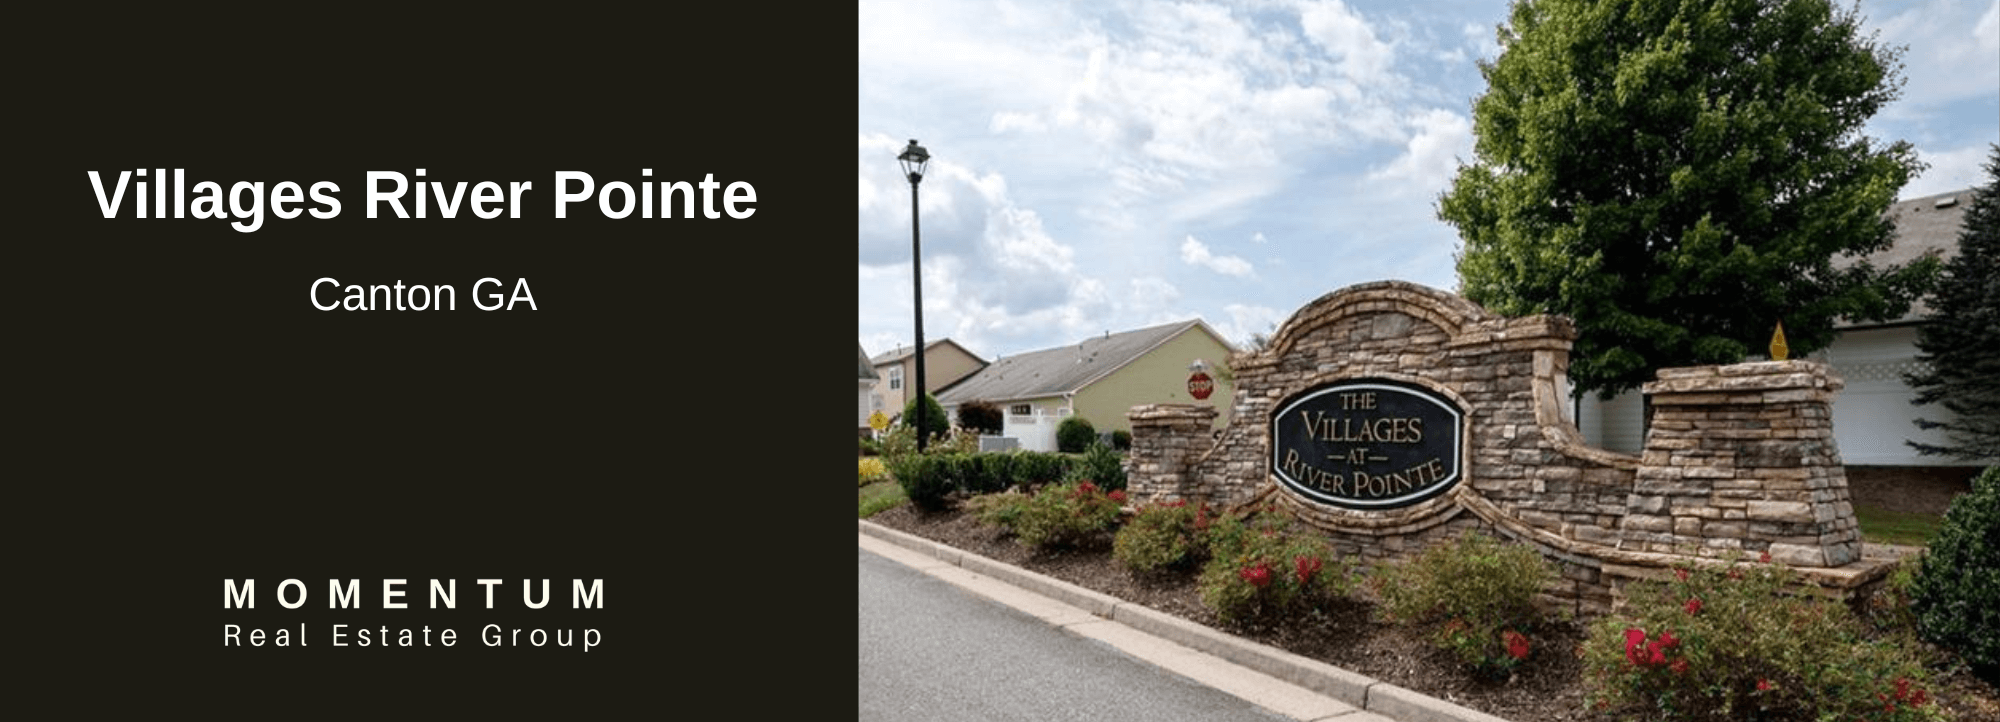 55 & Over Canton GA | Active Adult Homes for Sale in Canton | Villages River Pointe